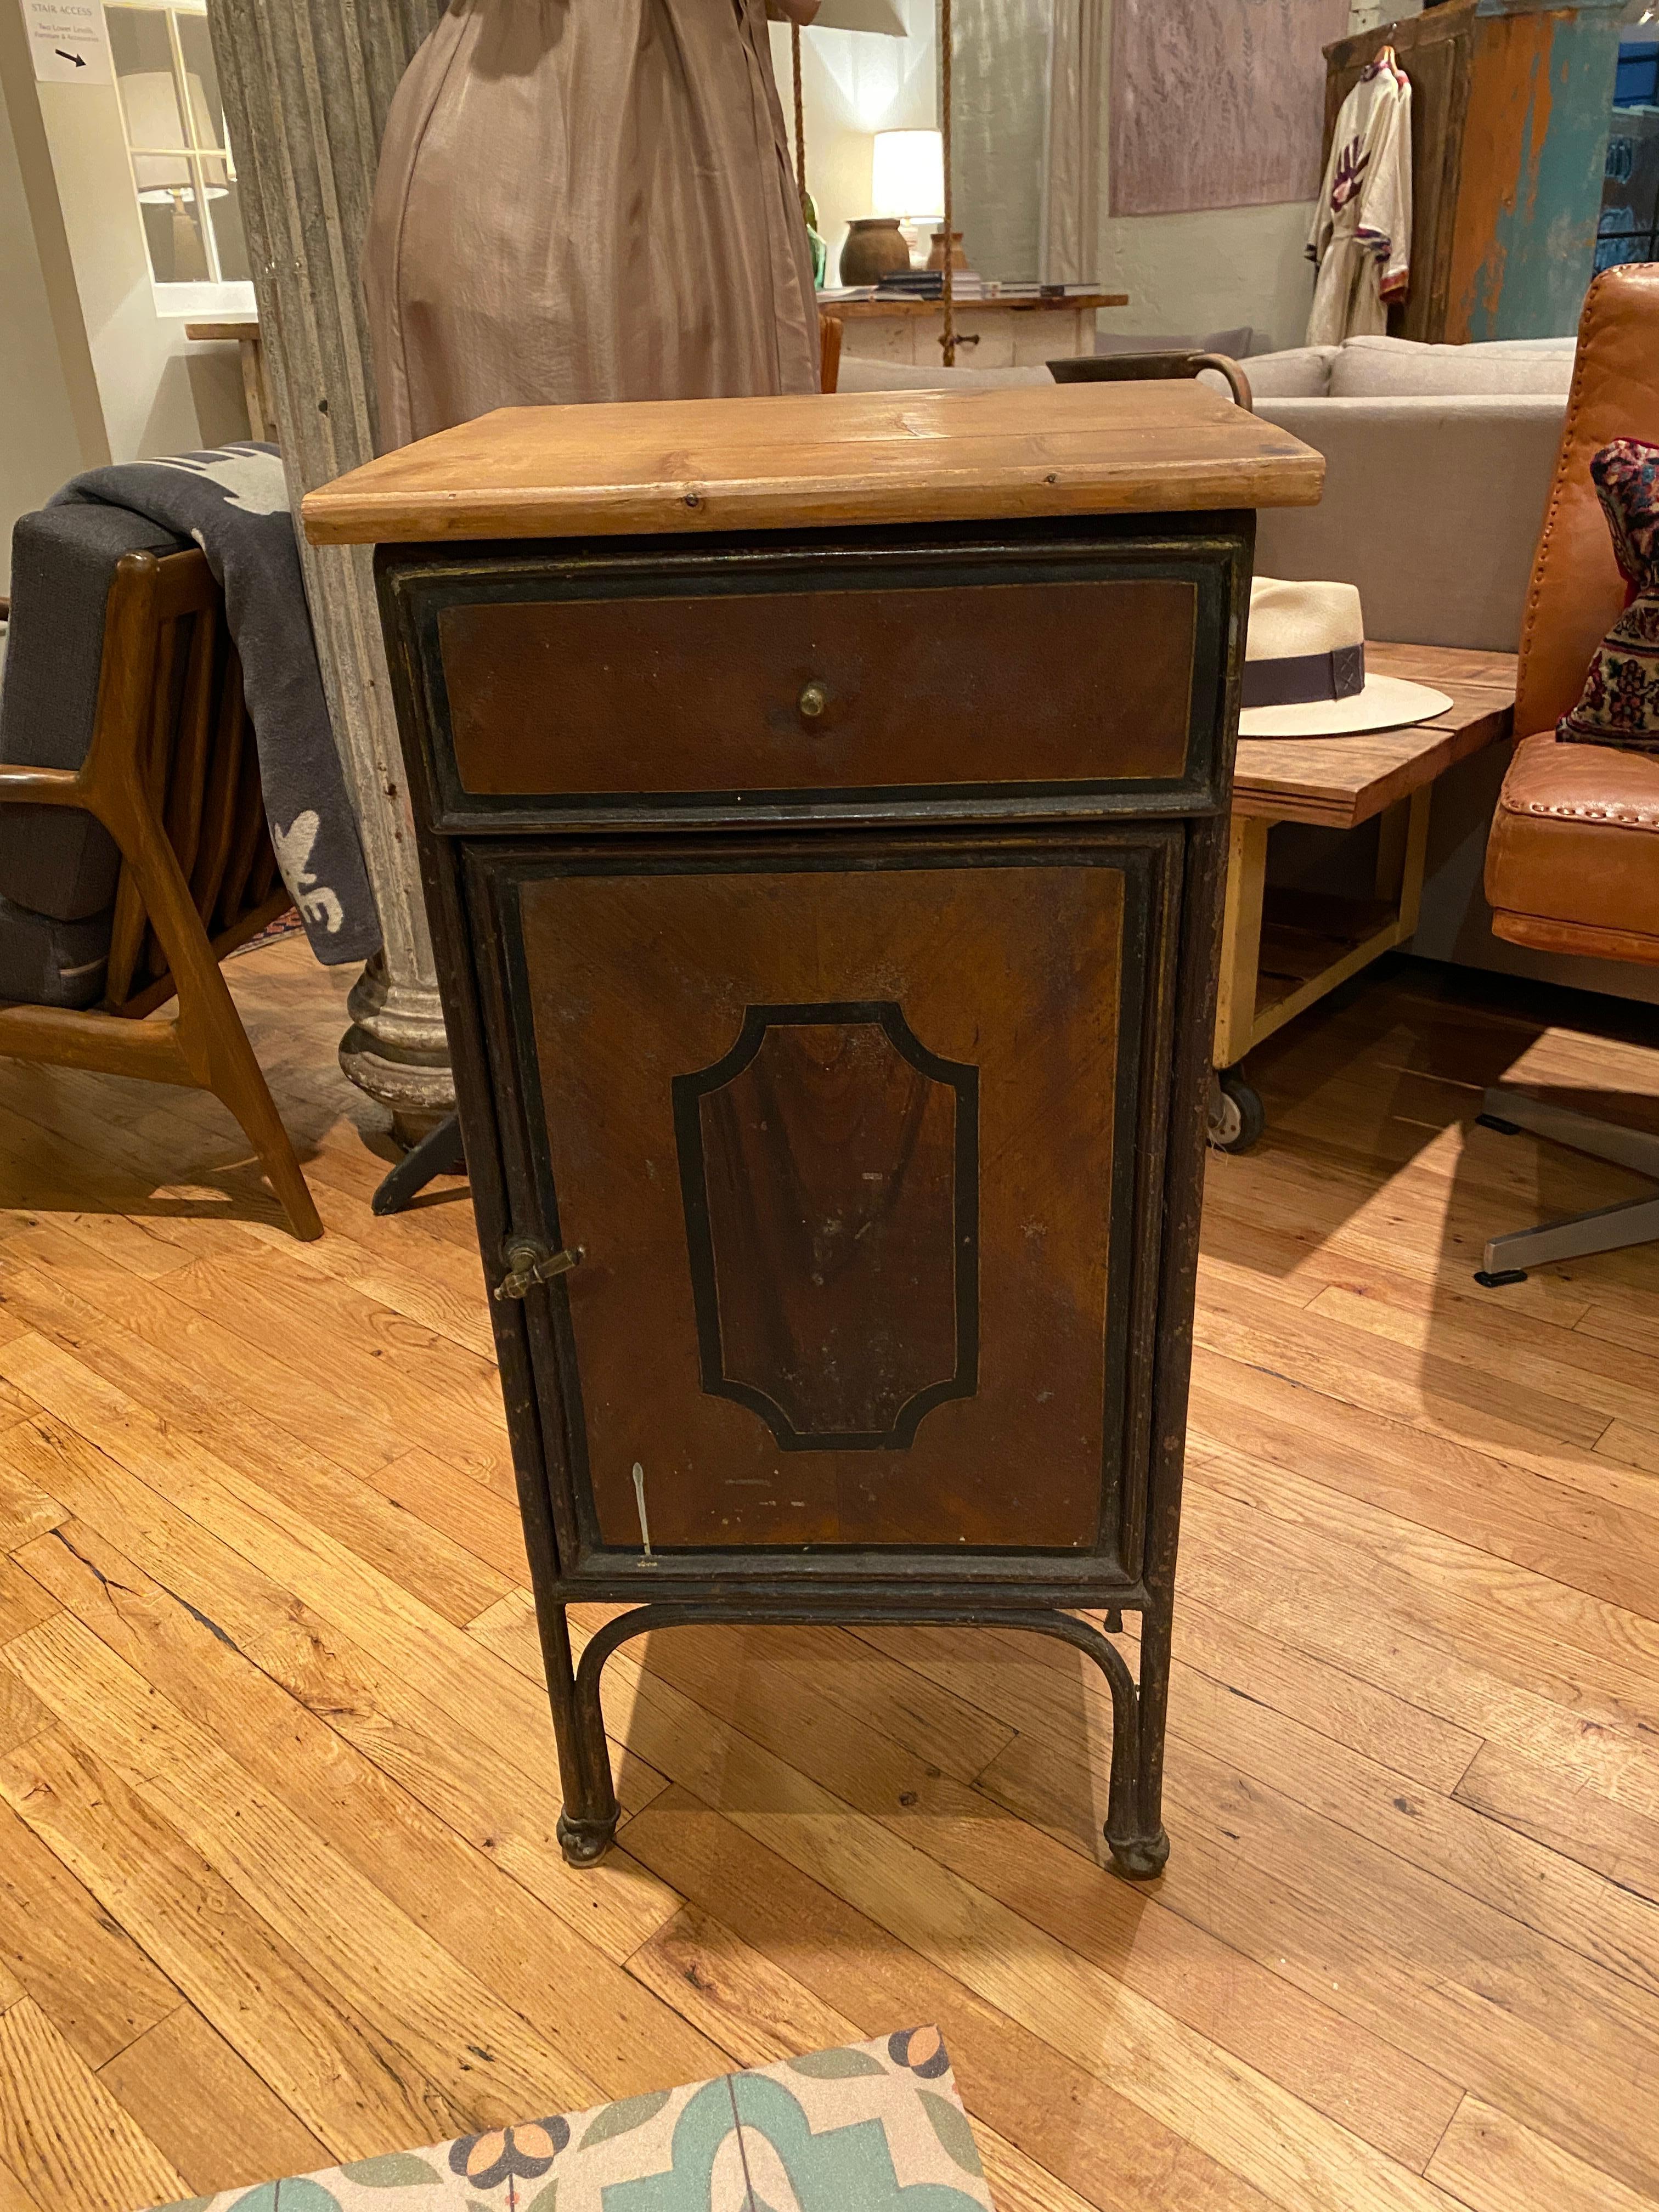 This beautifully aged vintage nightstand is a versatile piece that lives up to its industrial aesthetic; with a weighted metal body this piece is meant to last. Artistically painted wood facade to mimic rich mahogany. Can be used a nightstand, end